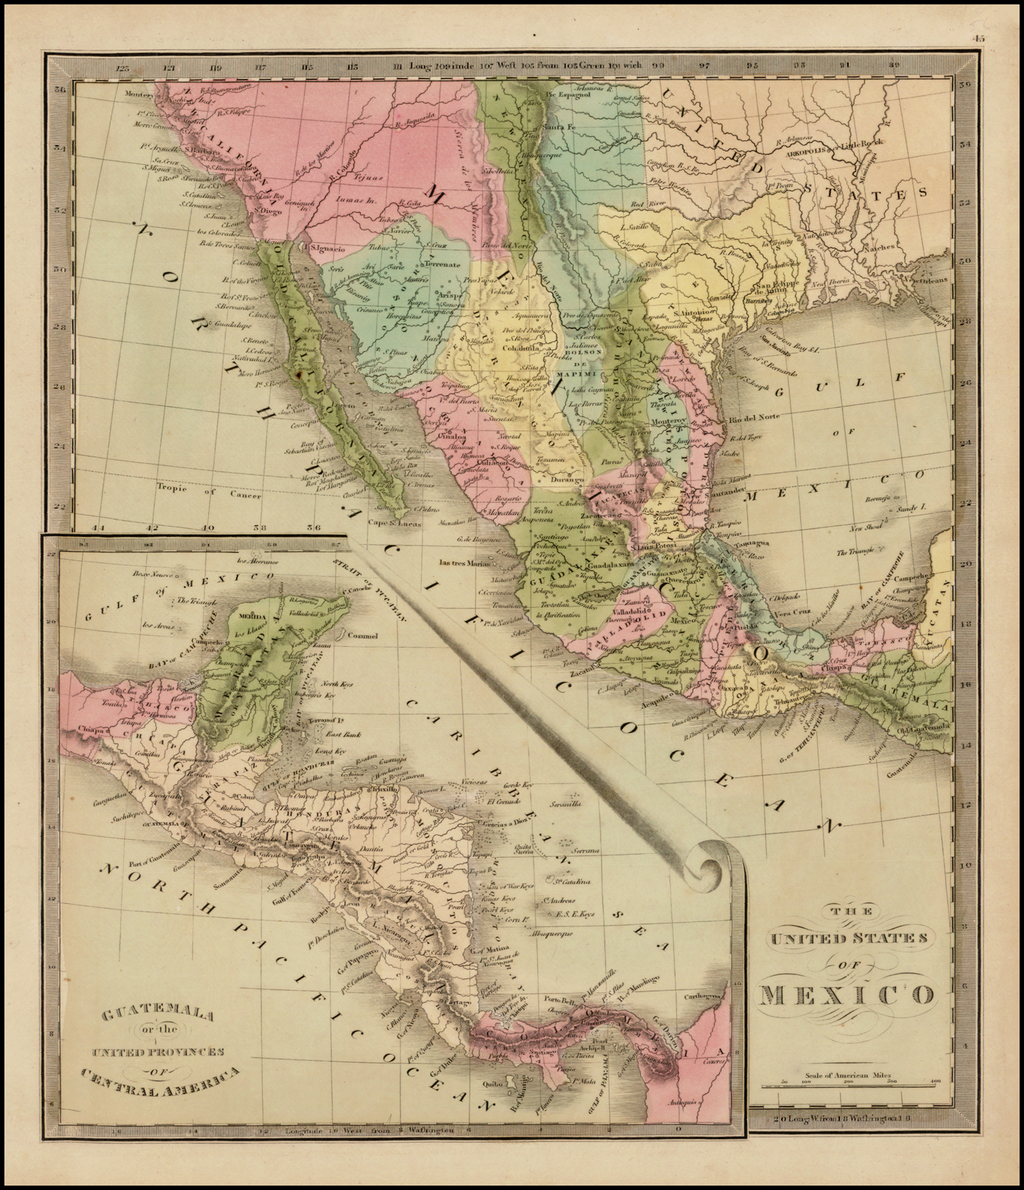 The United States of Mexico . . . [Republic of Texas] - Barry Lawrence ...